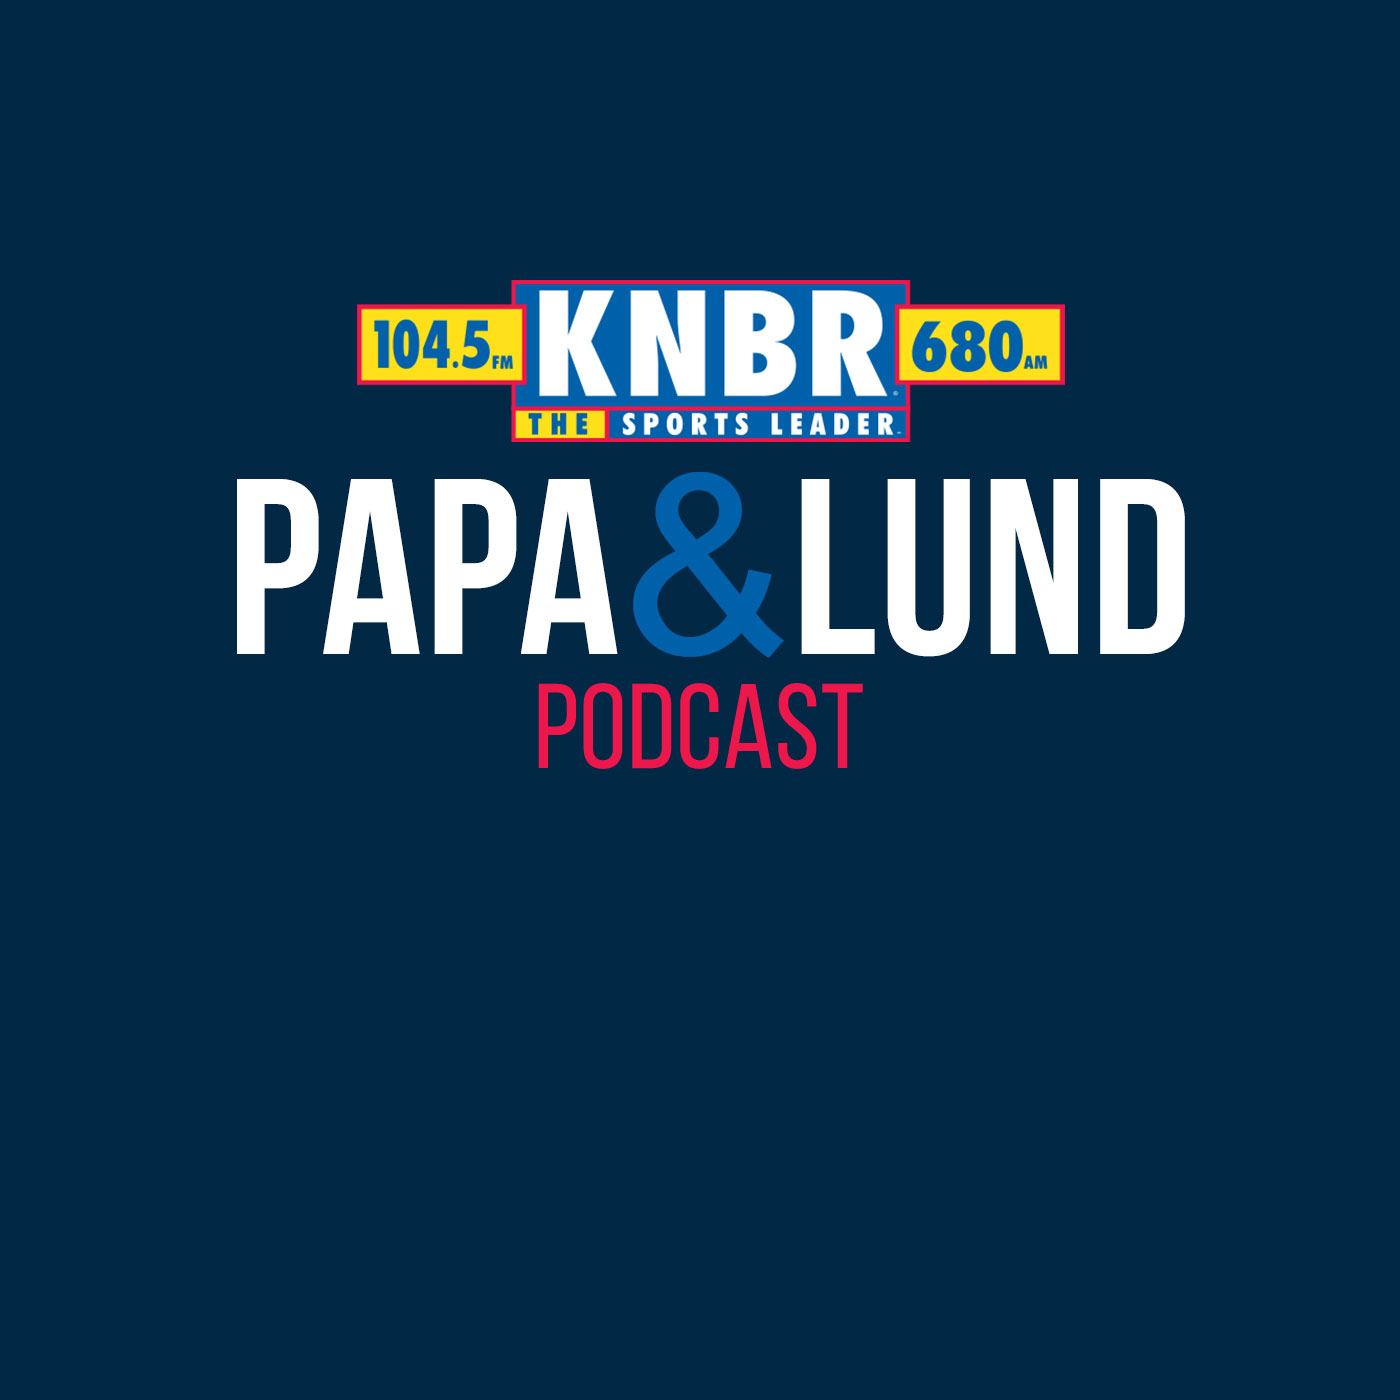 8-1 Mike Yam joins Papa & Lund to discuss Deebo's new contract extention and what that means for the development of Trey Lance moving forward